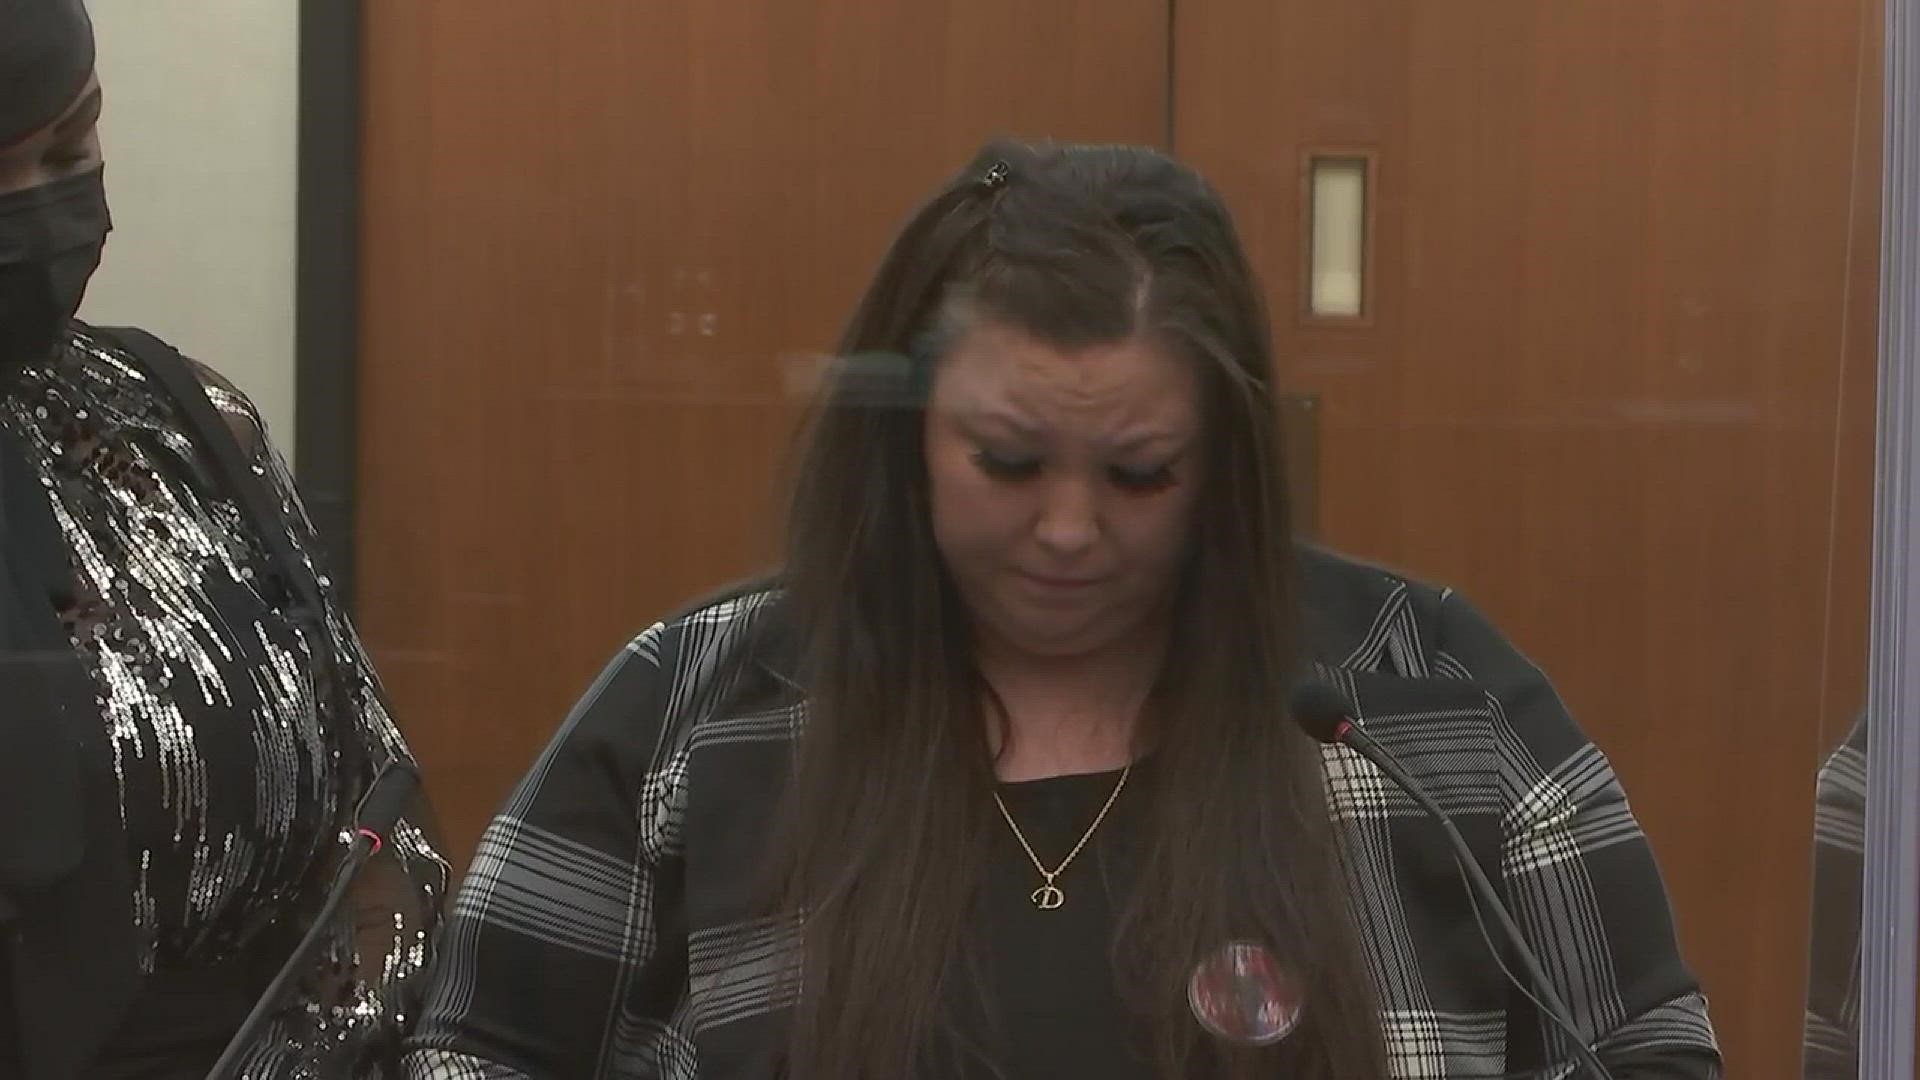 Katie Wright gave an emotional statement to the court at the sentencing of former officer Kim Potter, convicted on manslaughter charges in Daunte Wright's death.